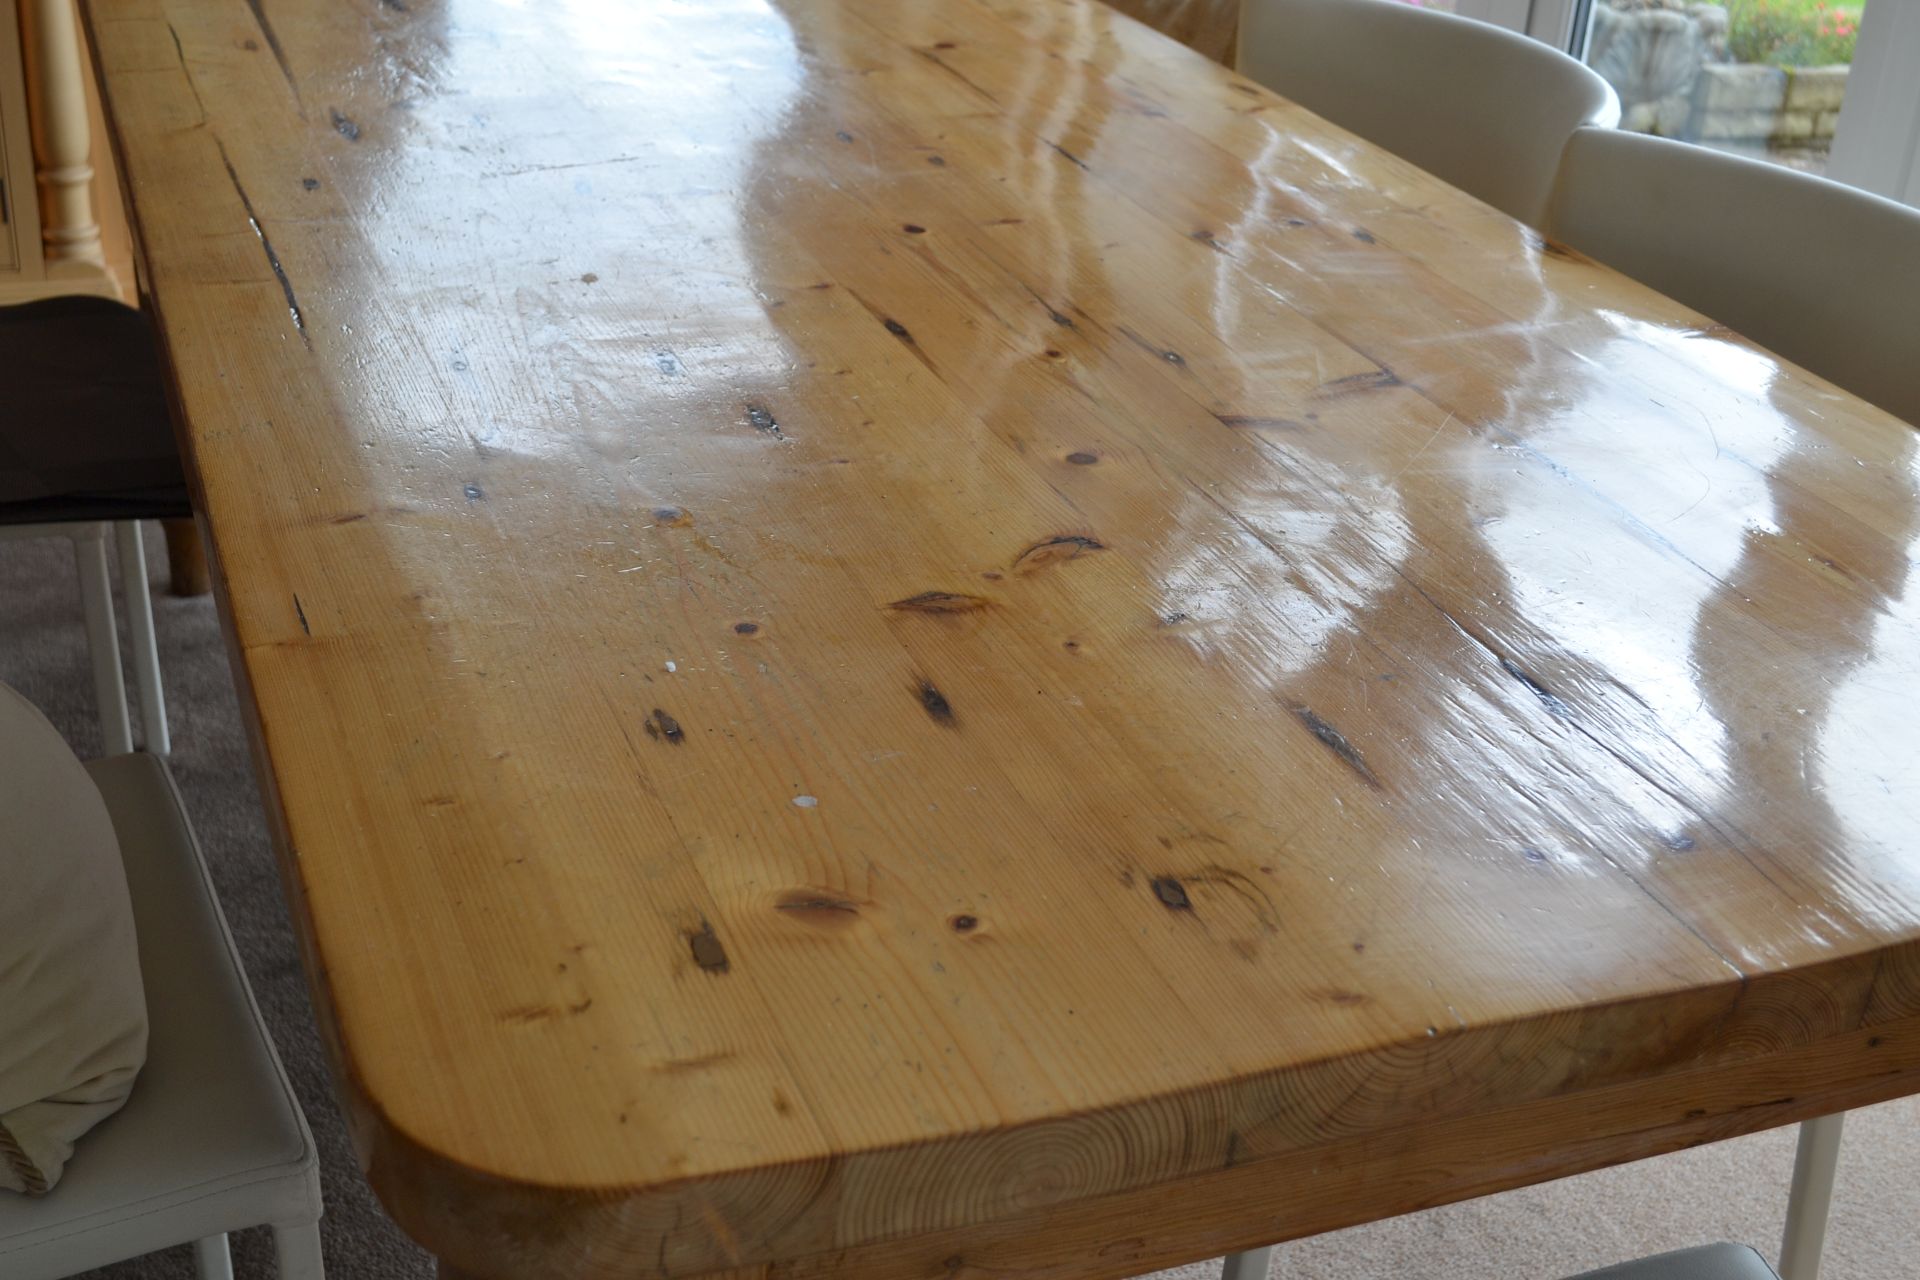 1 x Bespoke Pine Dining Table Made From Reclaimed Church Pews - CL226 - Location: Knutsford WA16 - Image 8 of 9